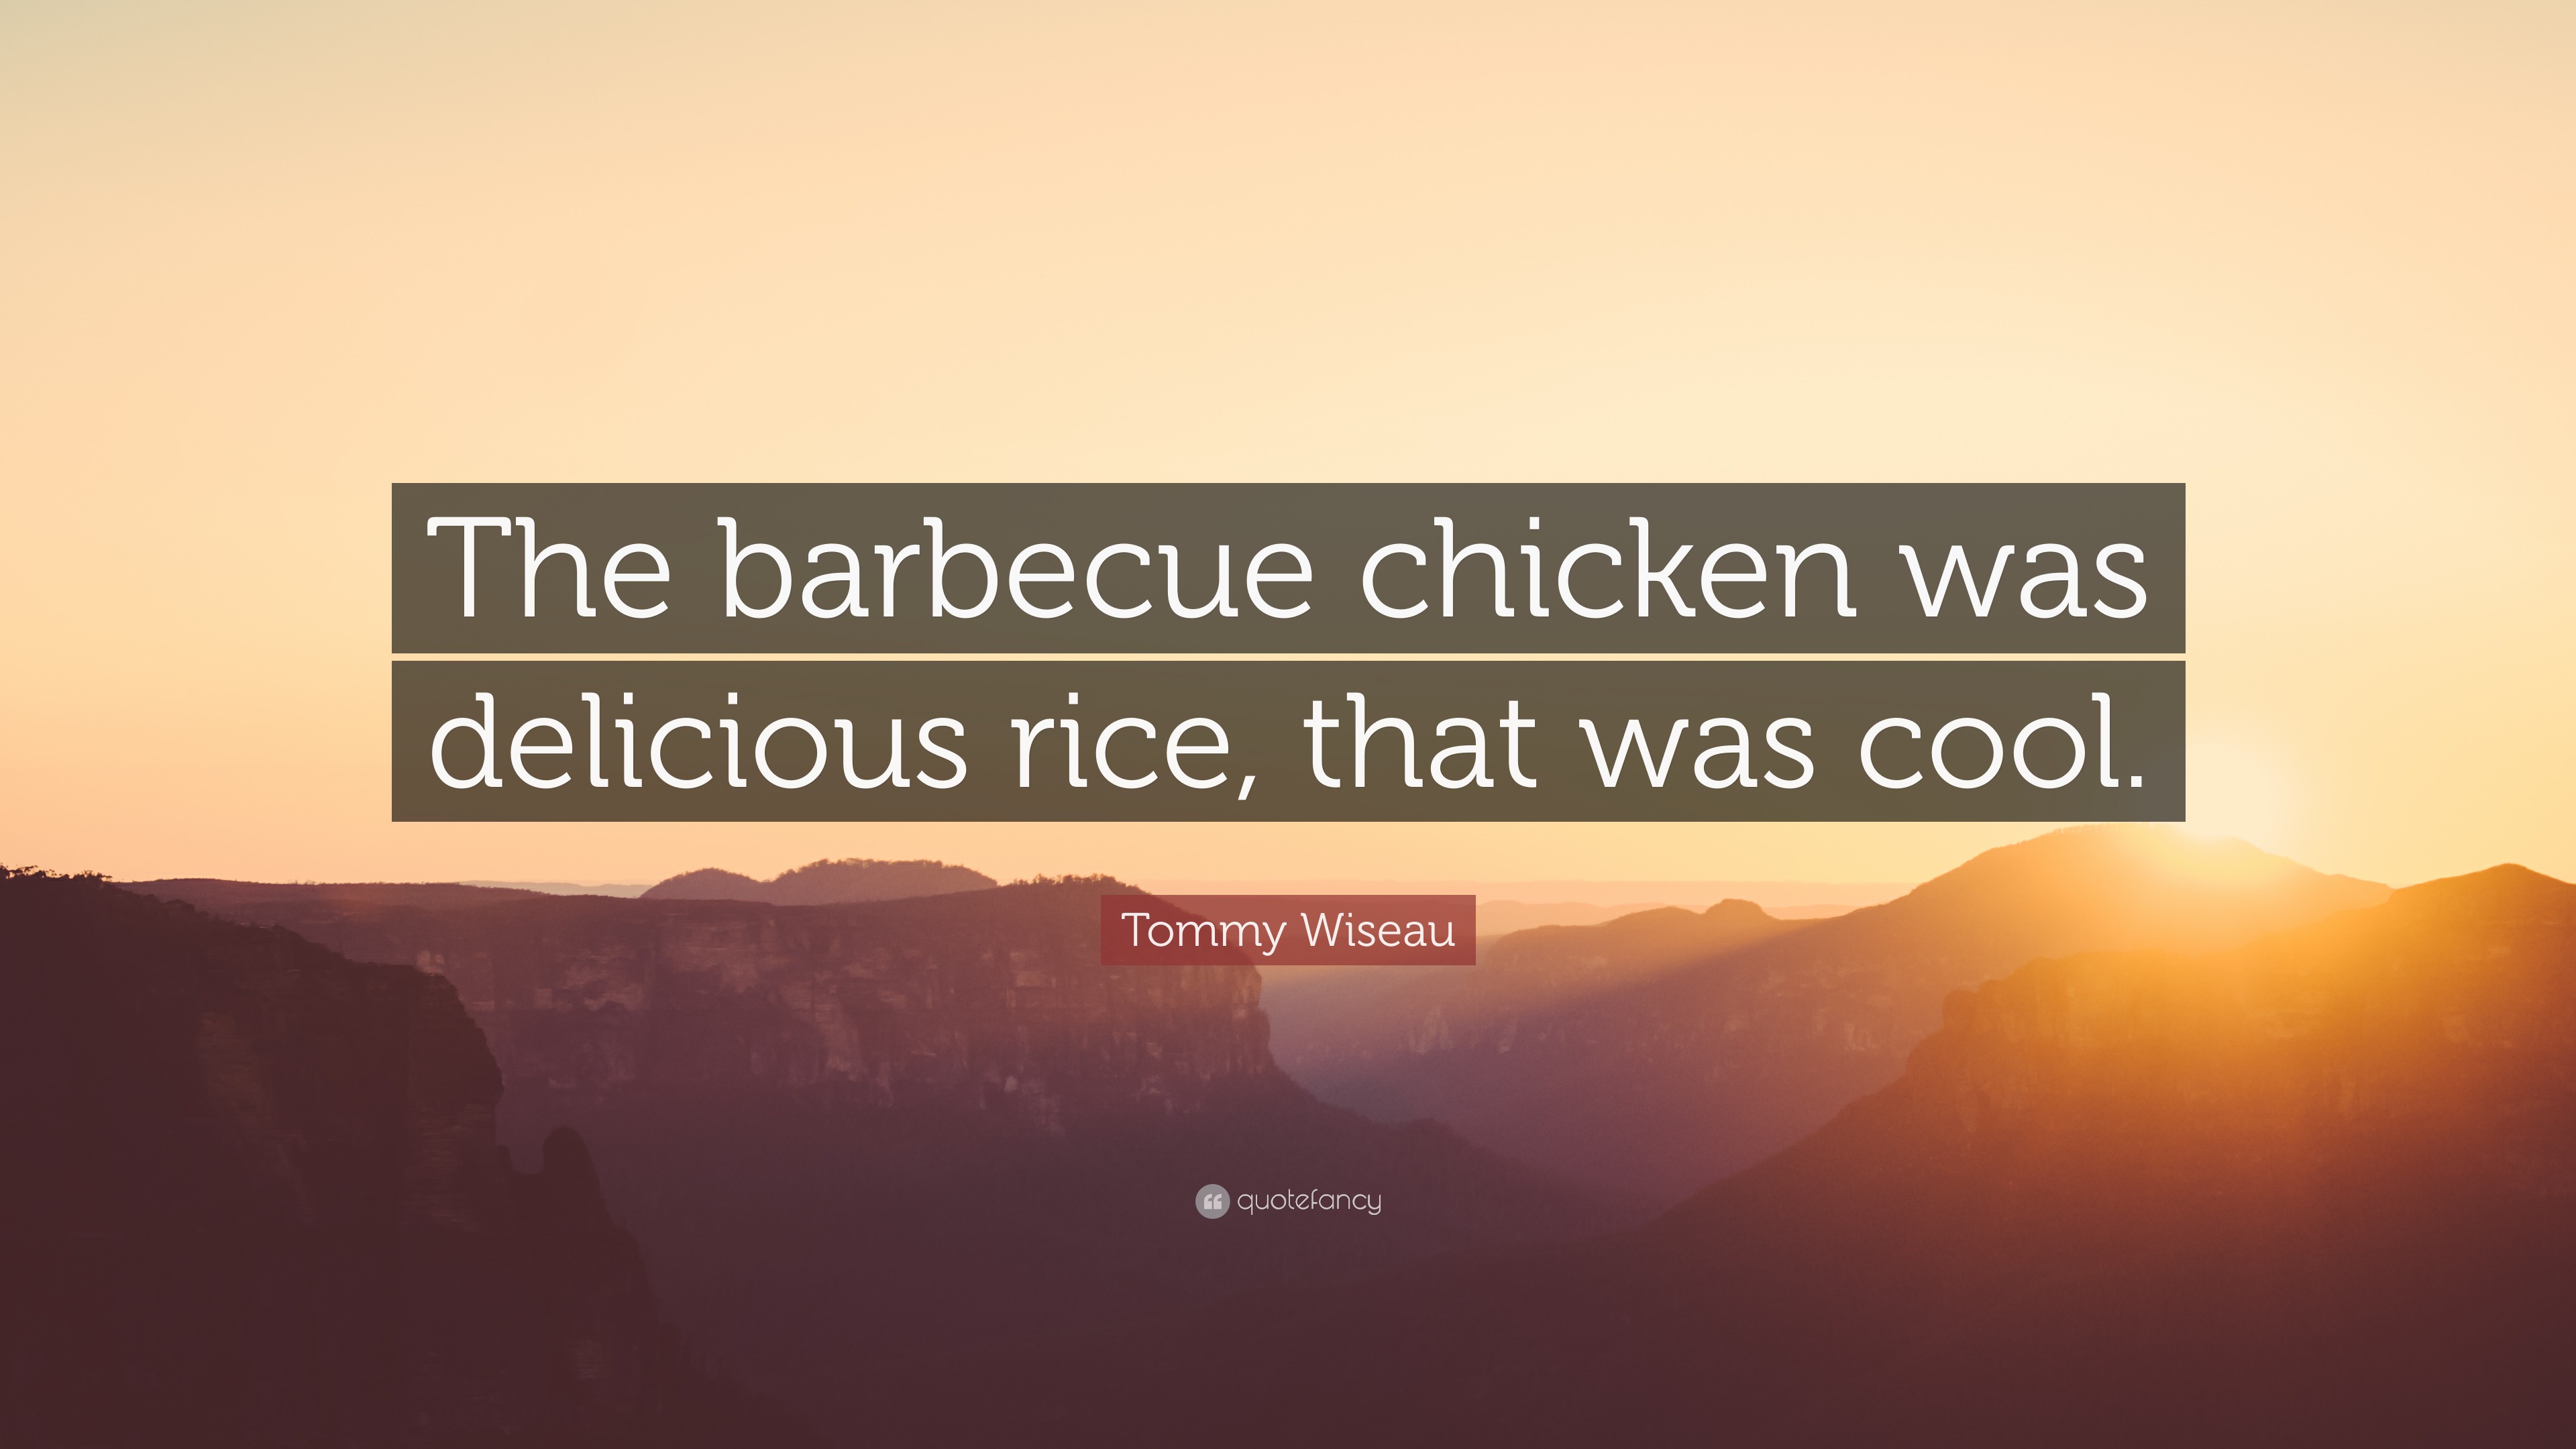 Top 40 Tommy Wiseau Quotes (2022 Update) - Quotefancy